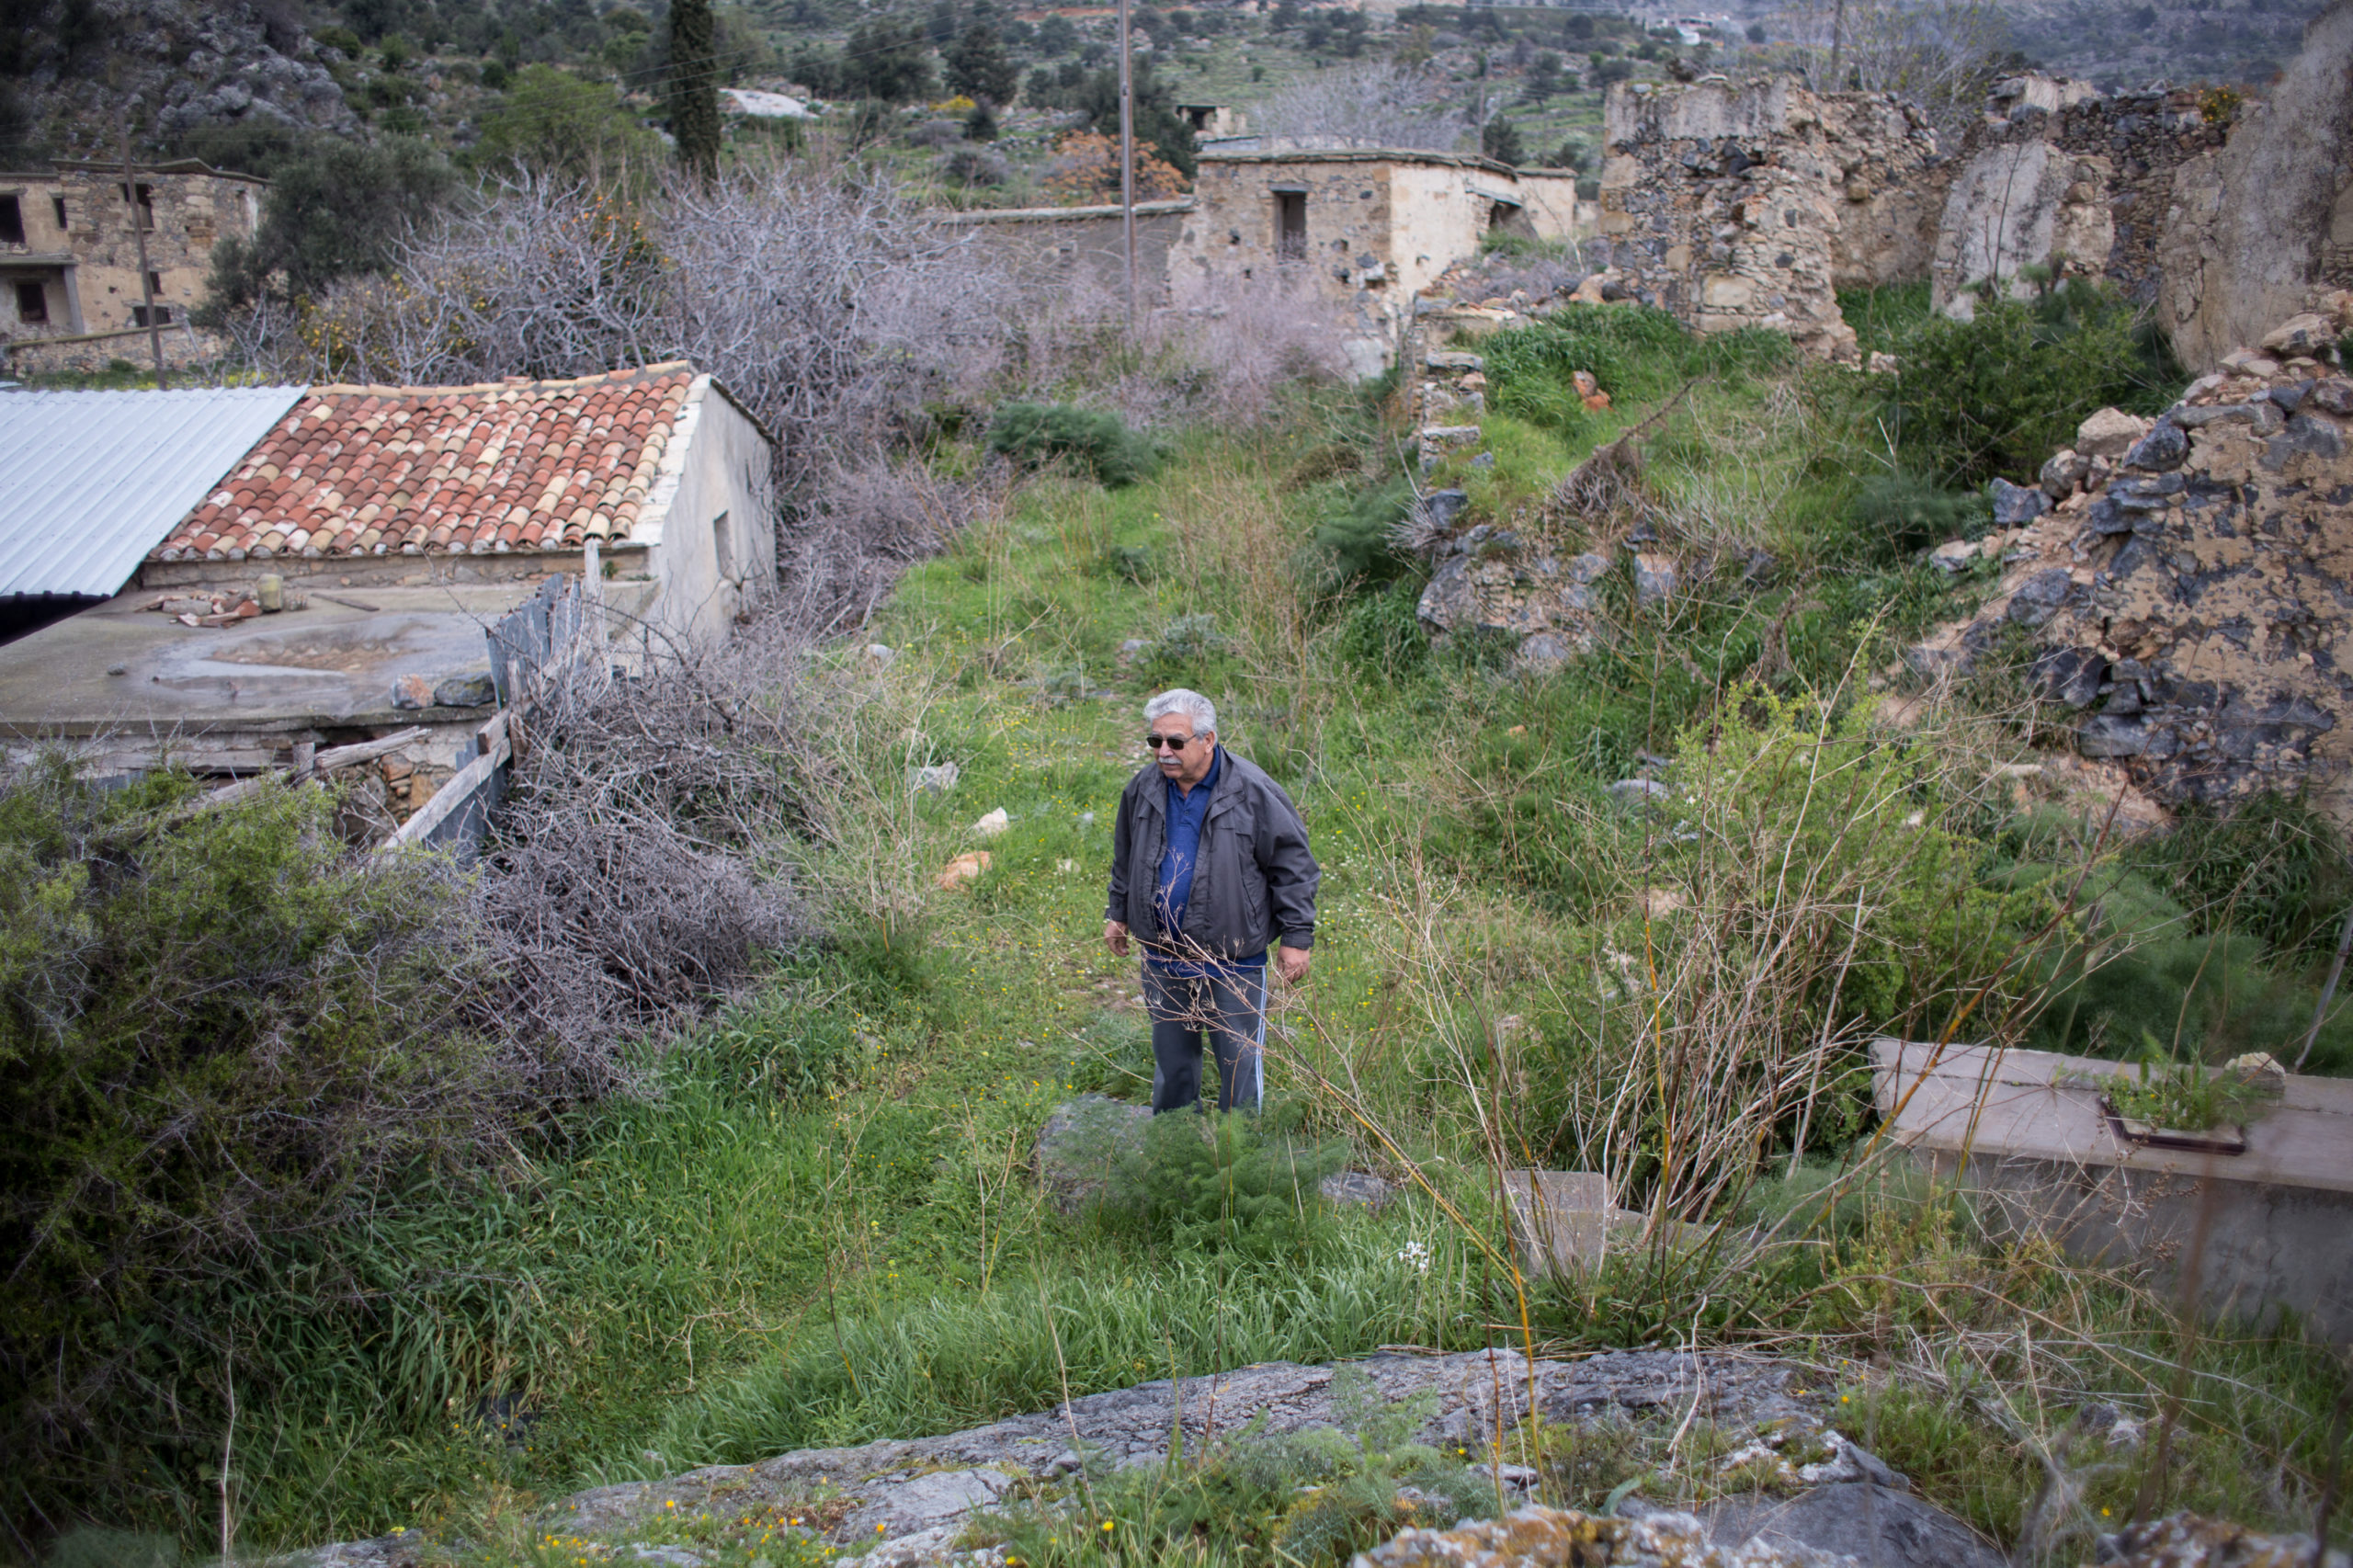 42 years after fleeing home, Elias returns to Syskiipos in the Turkish-occupied north. His house is in ruins, and the broken door is covered by nailed planks of wood.